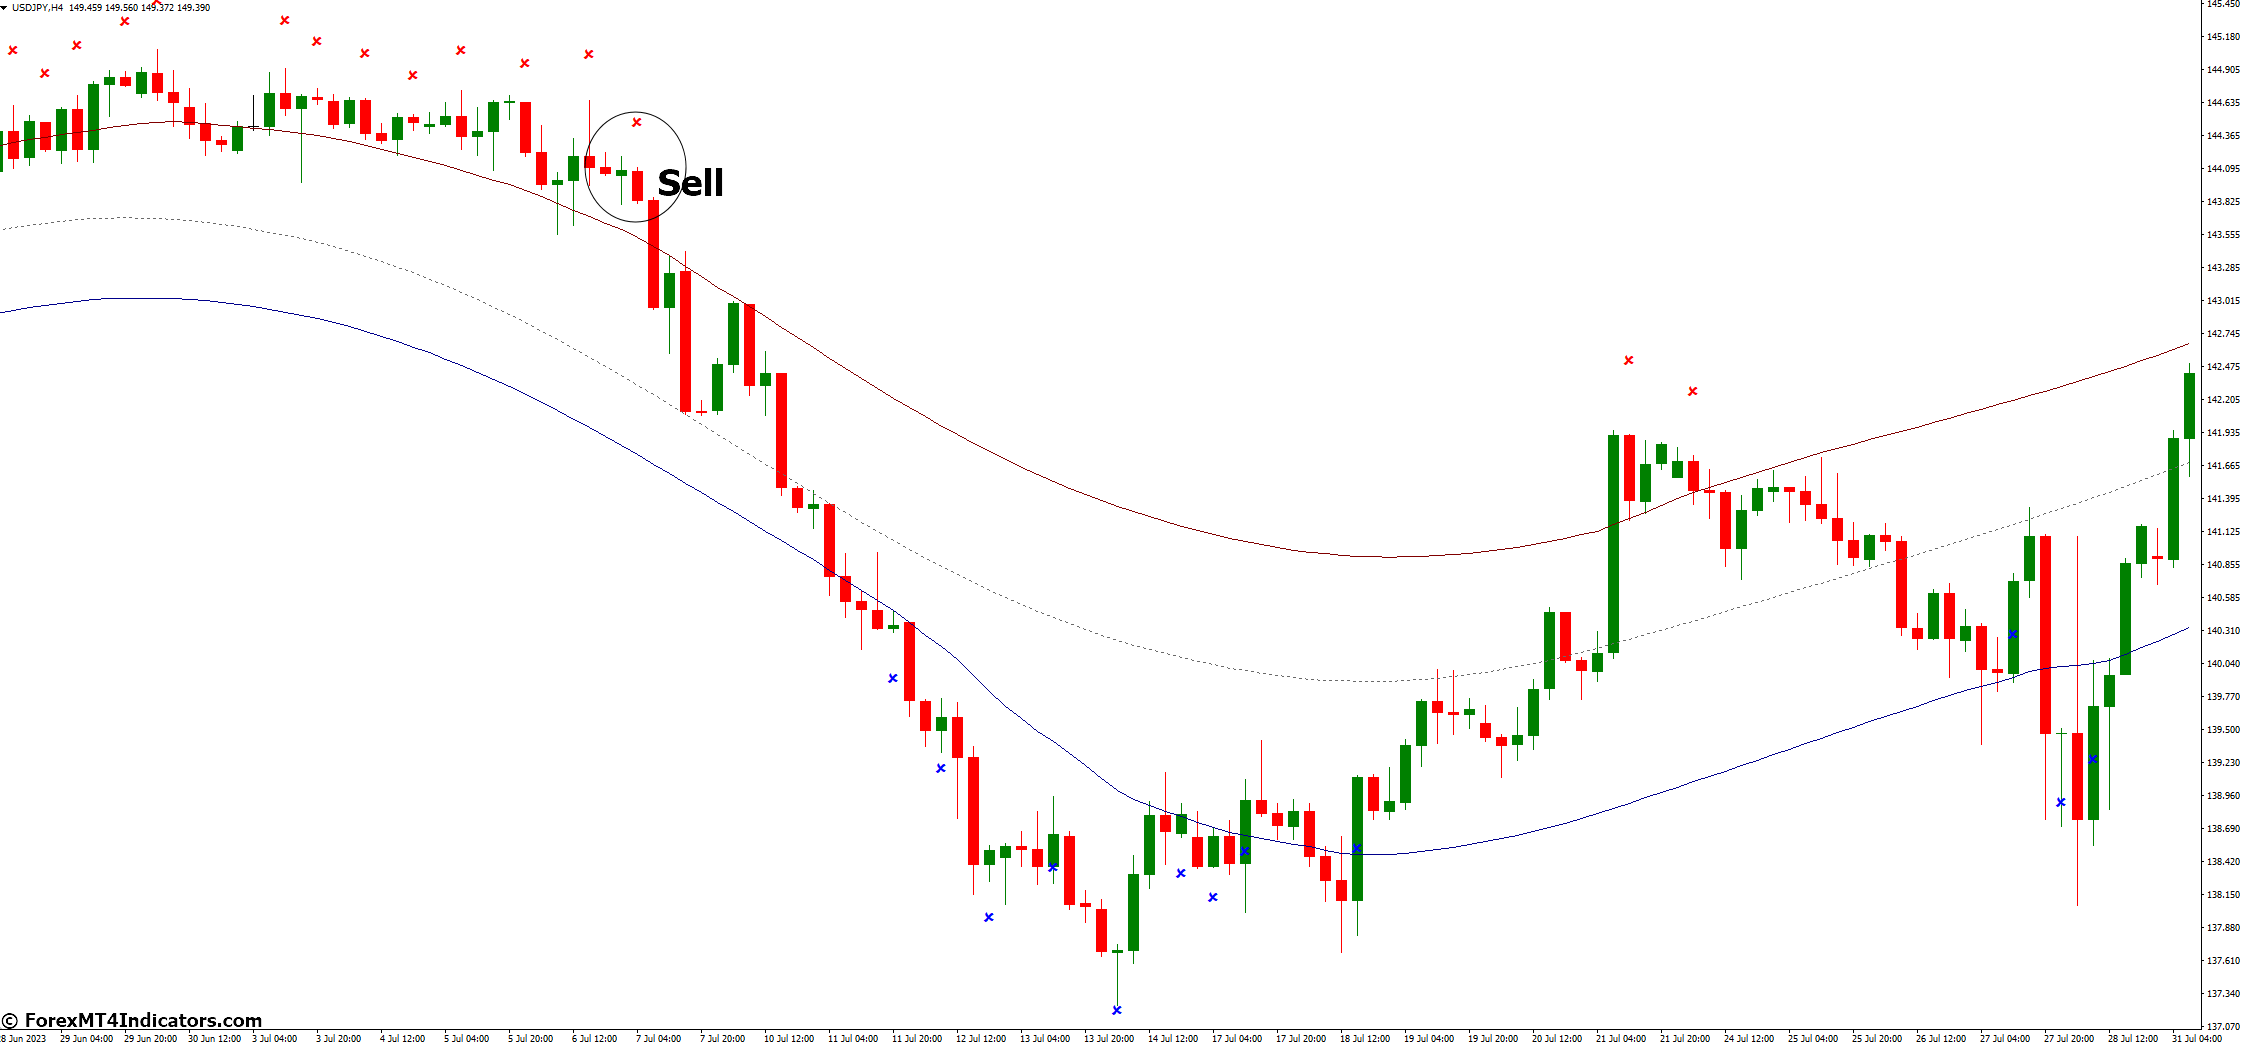 How to Trade with Cap Channel Trading MT4 Indicator - Sell Entry